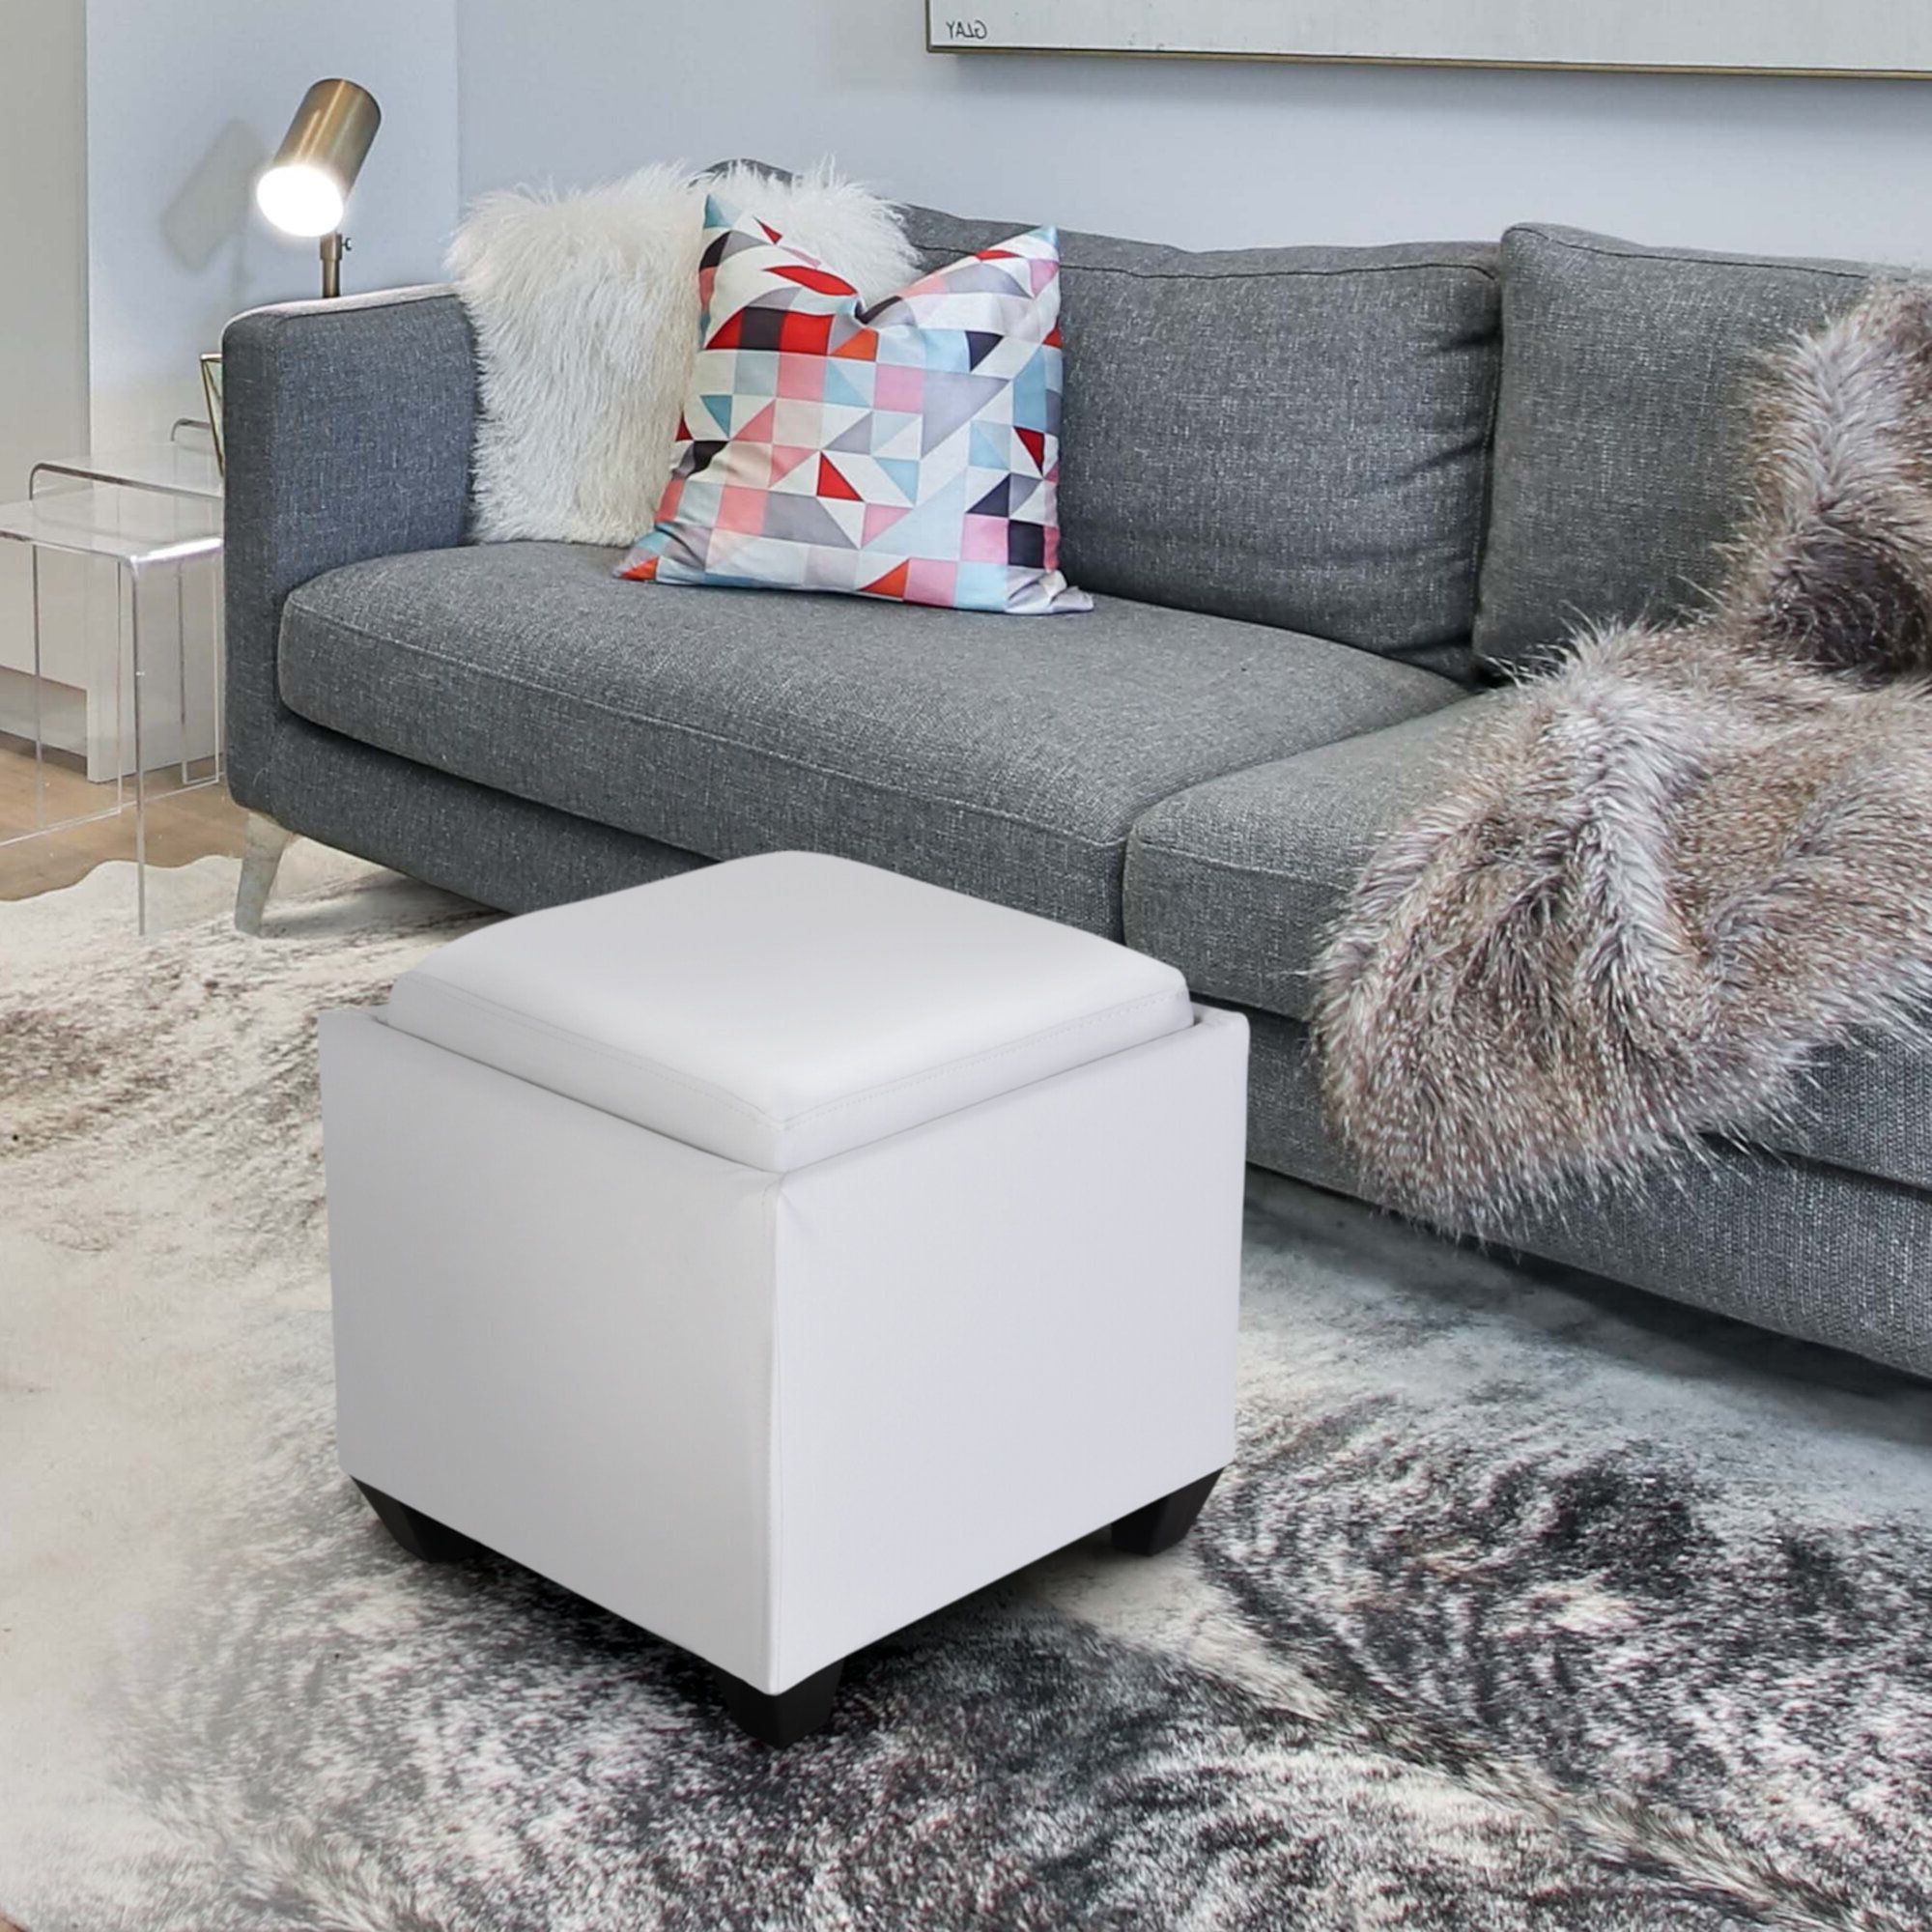 Silver Faux Leather Ottomans With Pull Tab Intended For Well Liked Zenvida Square Storage Ottoman With Tray, Small Cube Footstool (View 3 of 10)